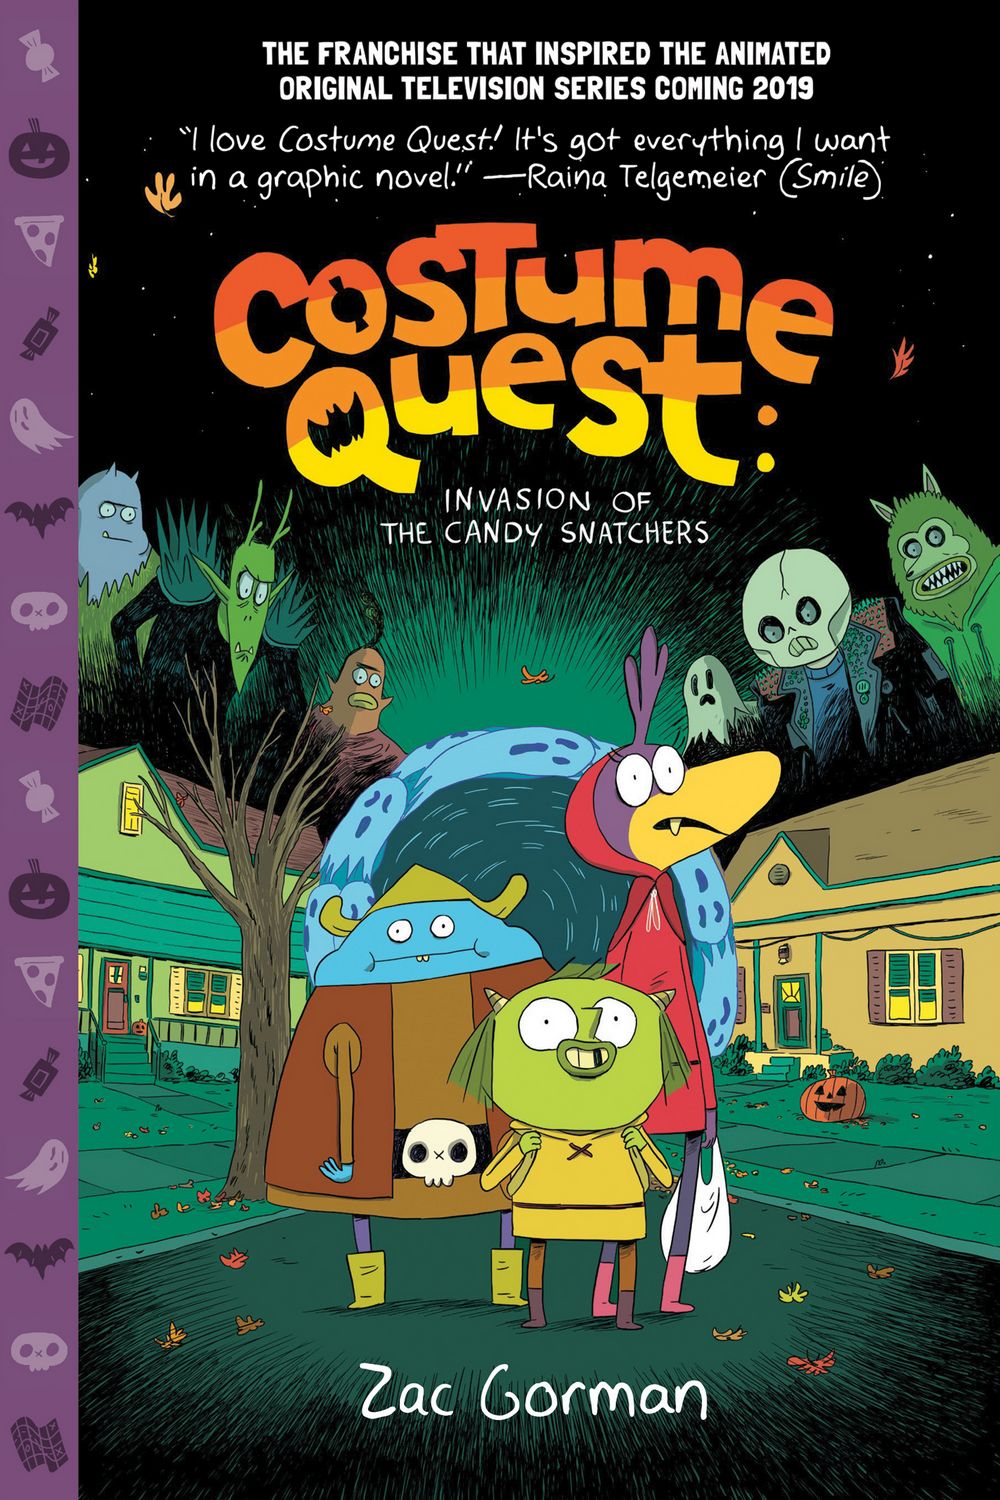 Costume Quest SC Invasion of Candy Snatchers